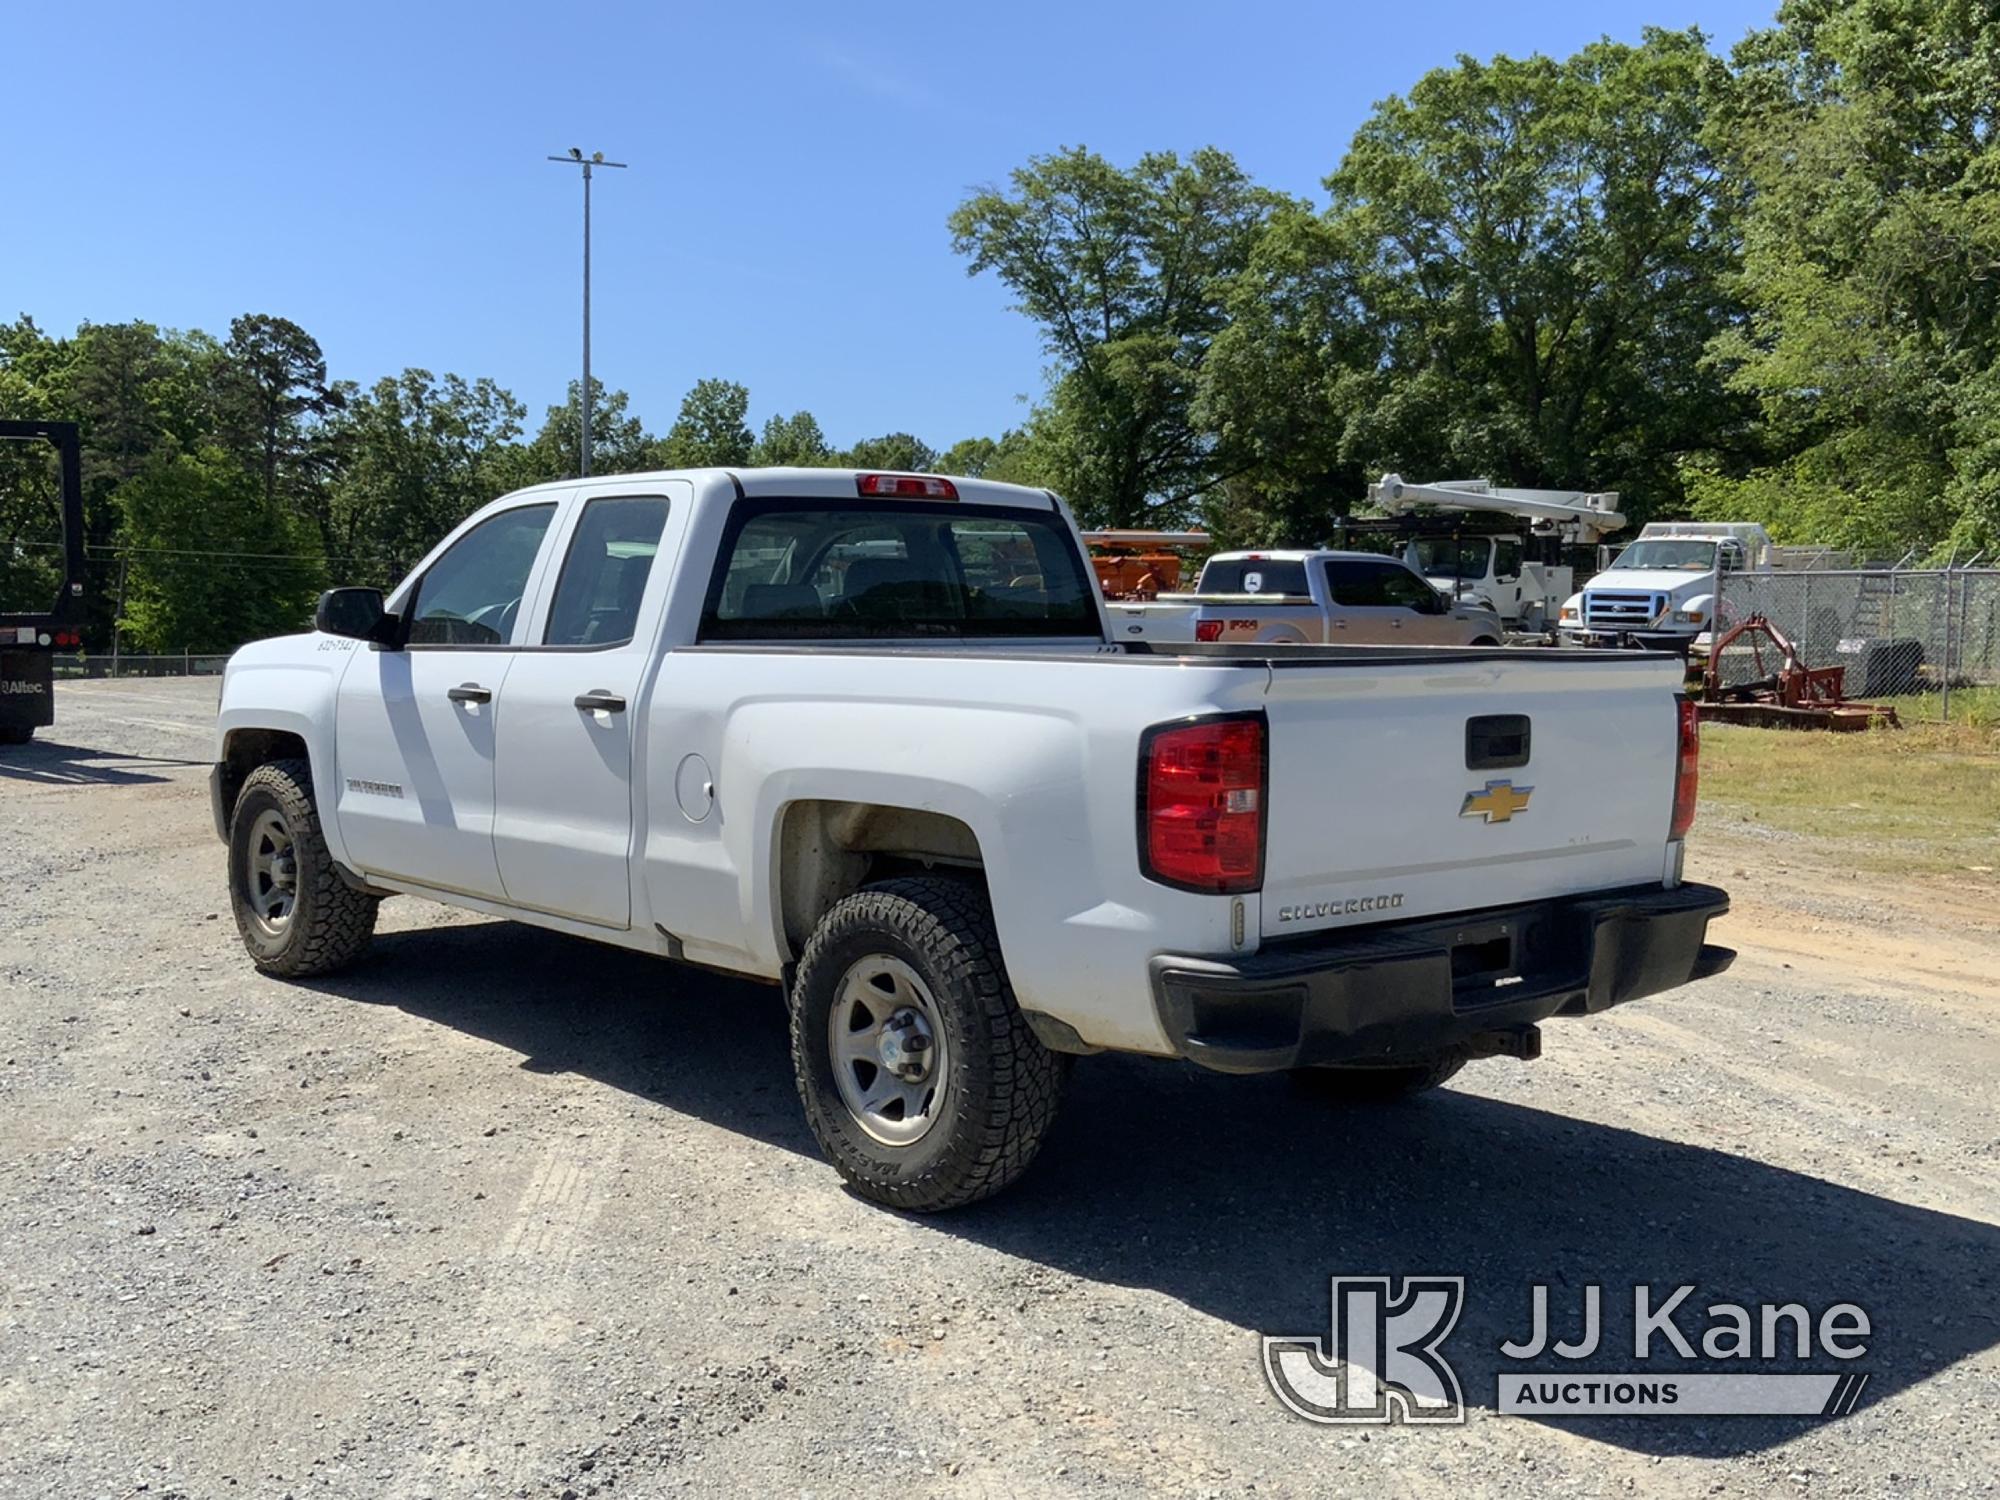 (Shelby, NC) 2017 Chevrolet Silverado 1500 4x4 Extended-Cab Pickup Truck, Needs new transmission Run